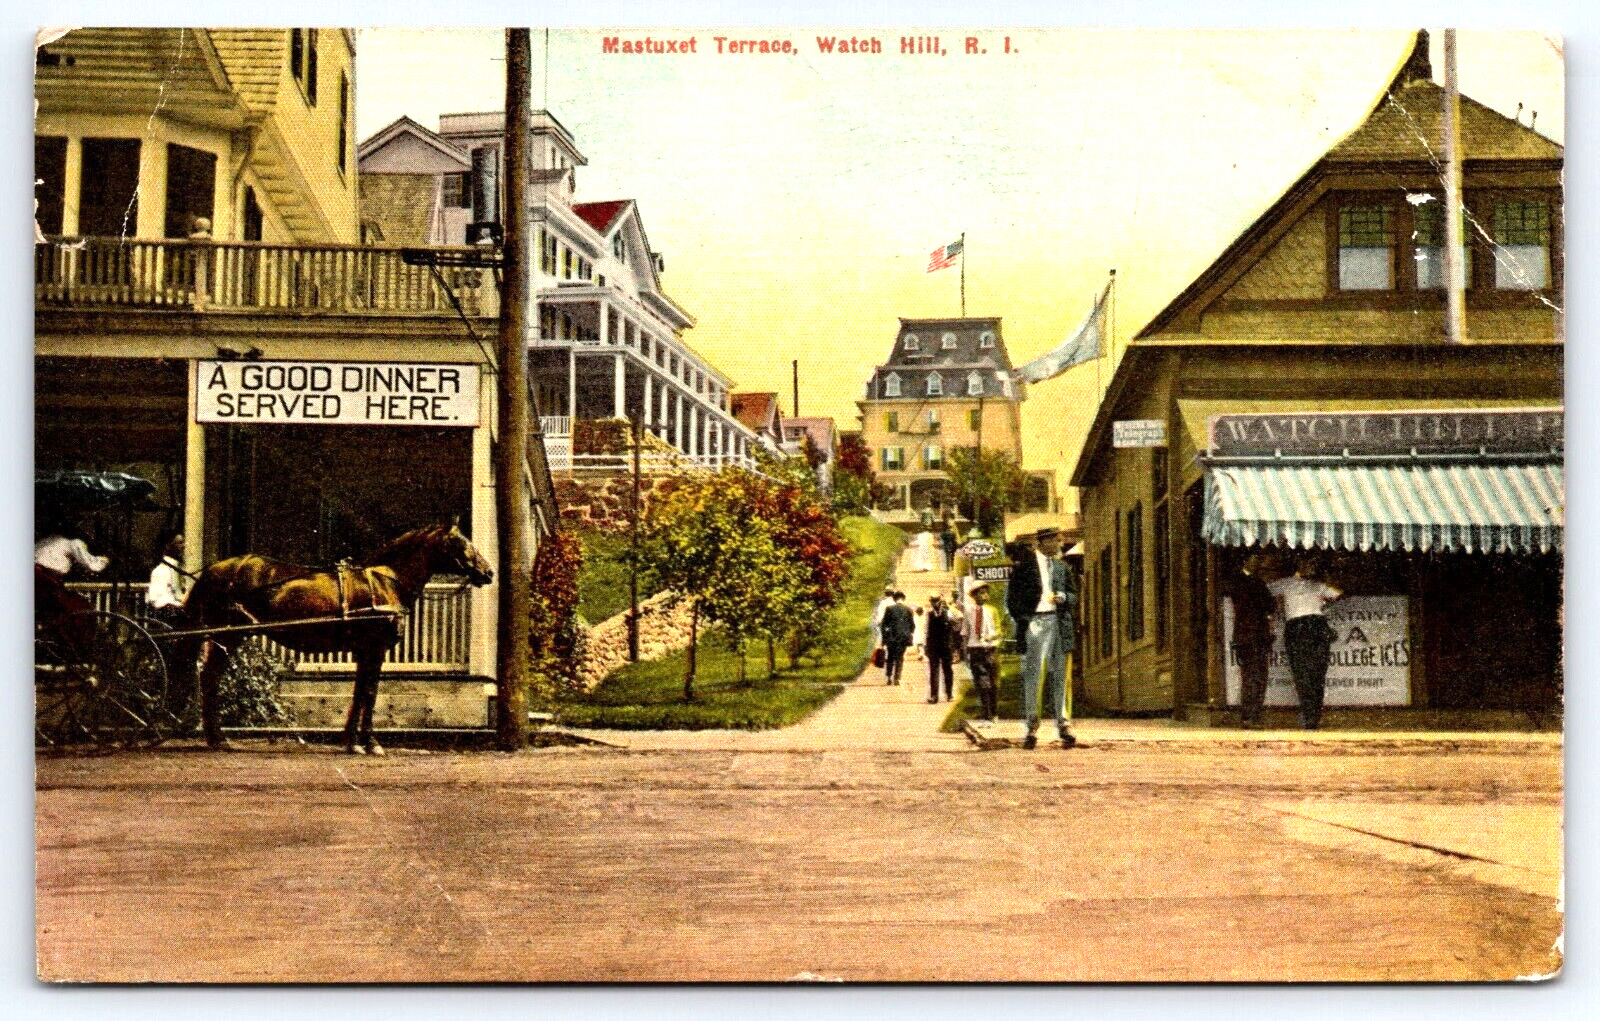 RARE Postcard Mastuxet Ter. Watch Hill RI One of Taylor Swift's Homes Here A17